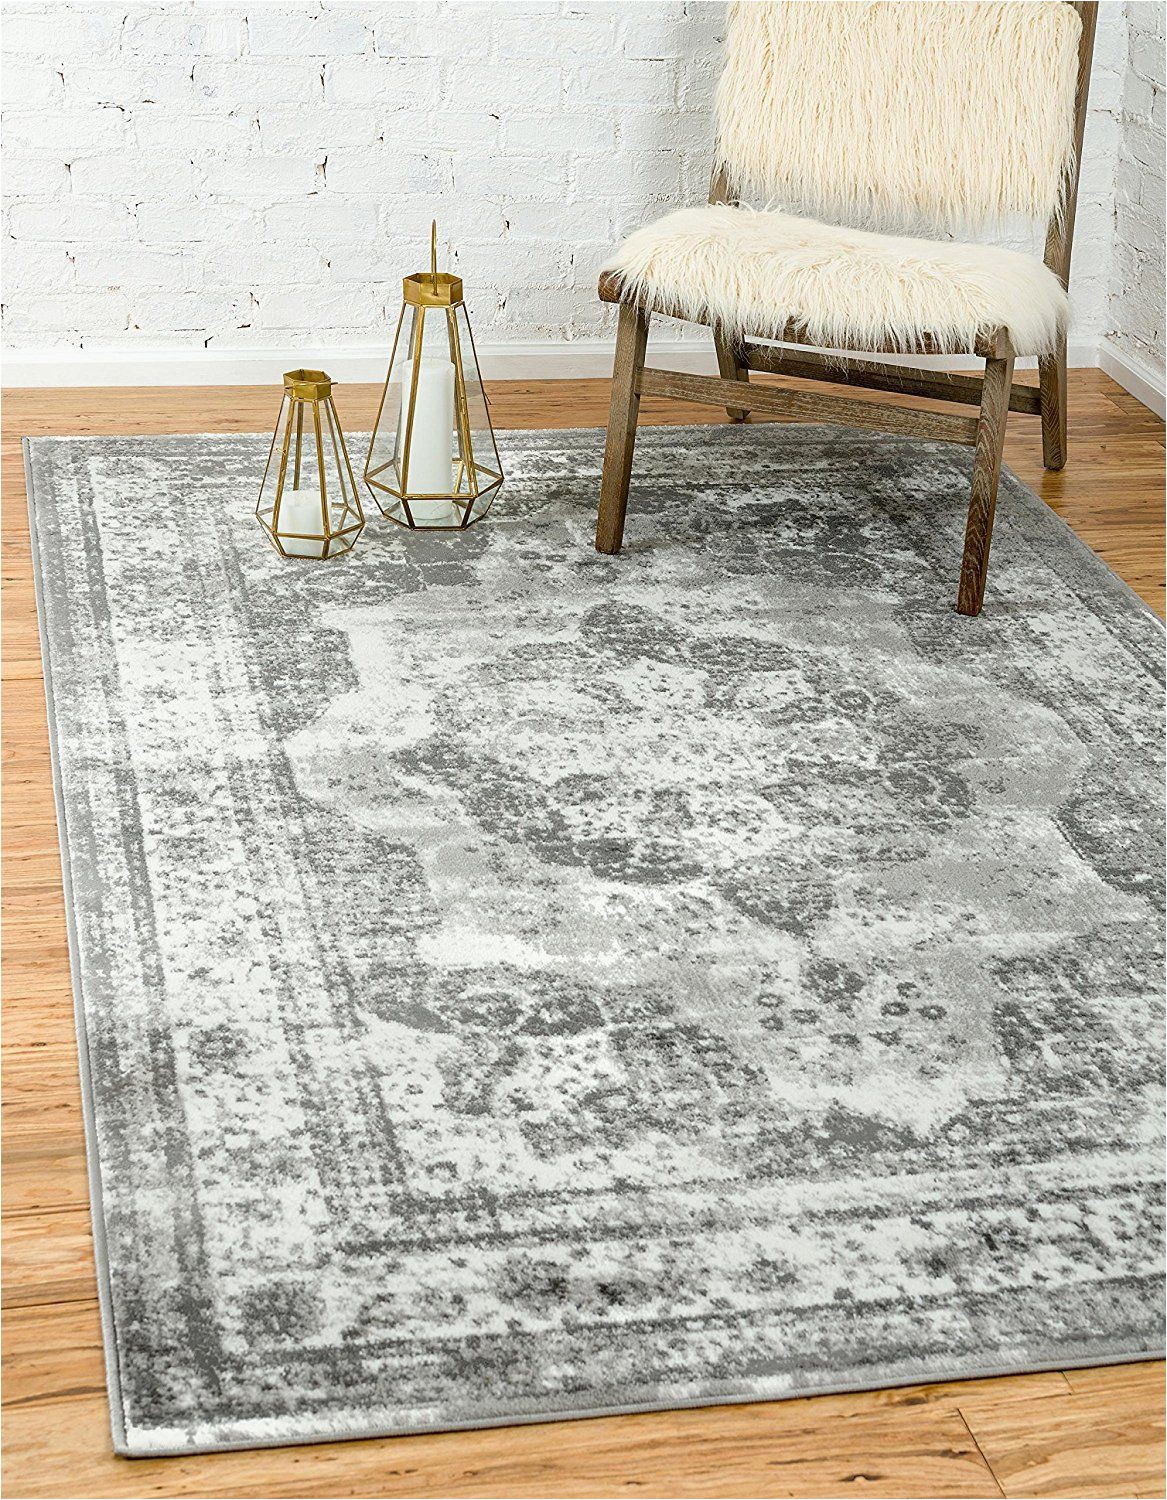 8 by 10 area Rugs for Sale Amazon Unique Loom sofia Collection Gray 8 X 10 area